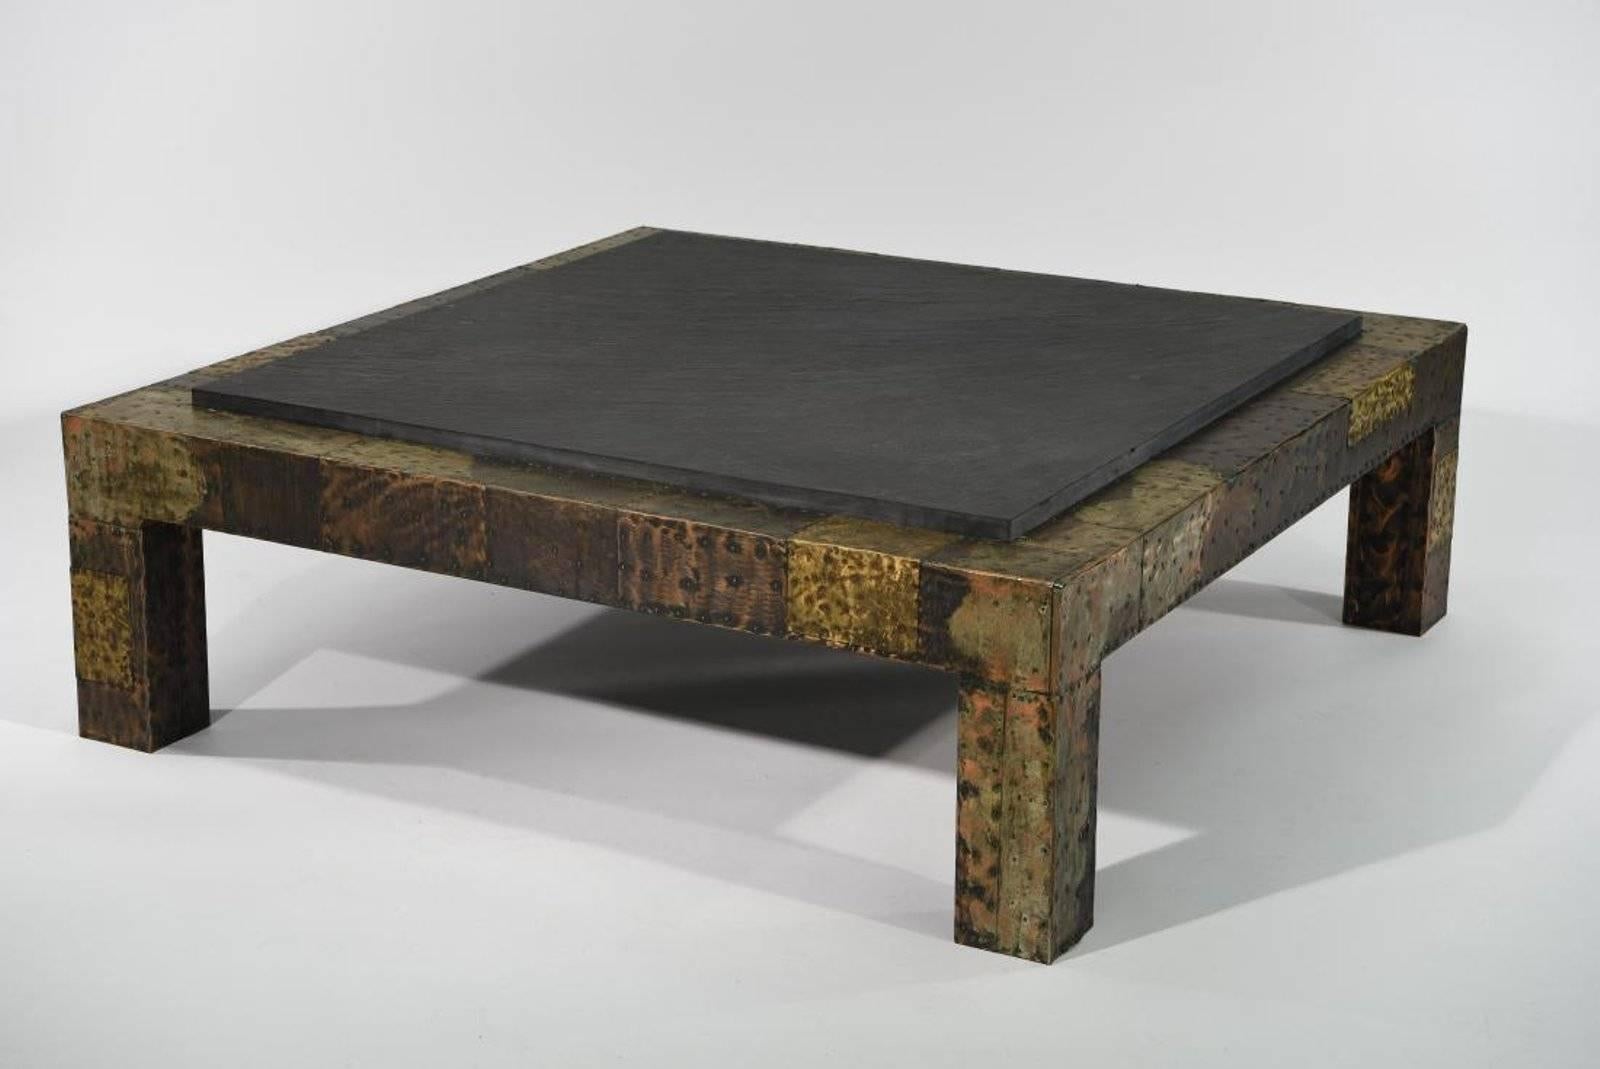 A monumental Pair of Paul Evans for Directional Brutalist patchwork metal coffee table with slate top. Part of a large collection of Paul Evans items fresh from an estate. Reference: Paul Evans designer and sculptor, Jeffrey Head, pg. 68 A designer